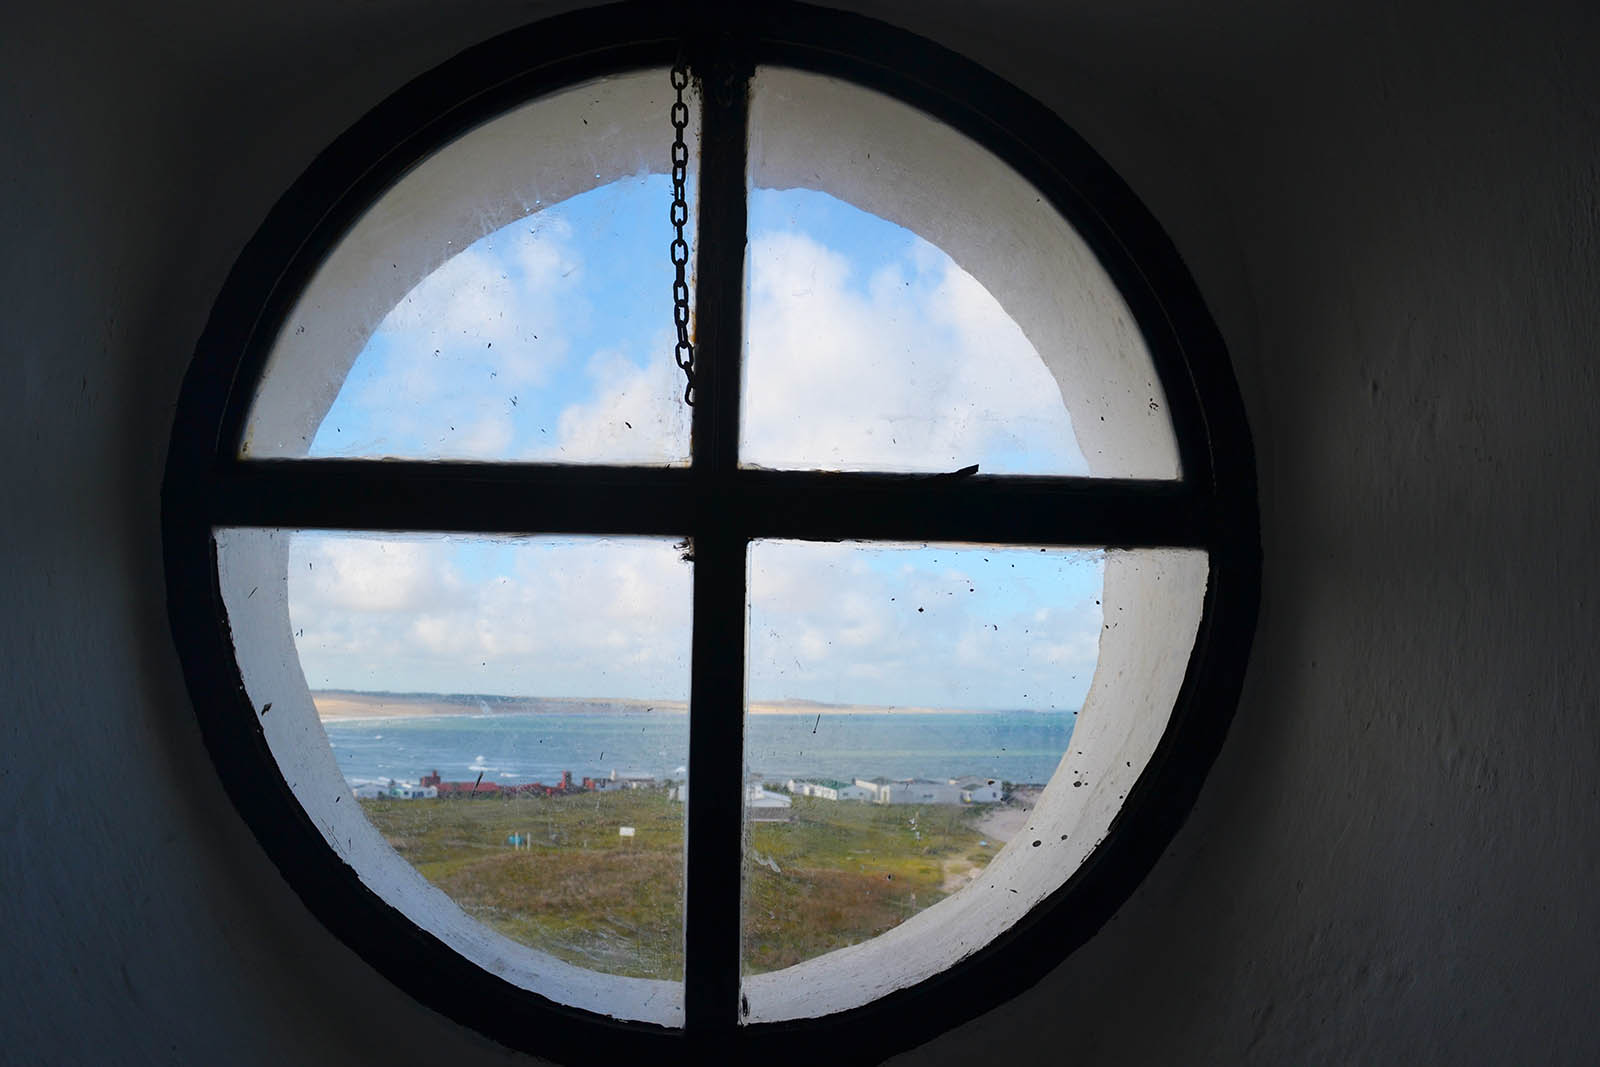 View from one of the windows of the lighthouse of Cabo Polonio. Credit: Niki Biller